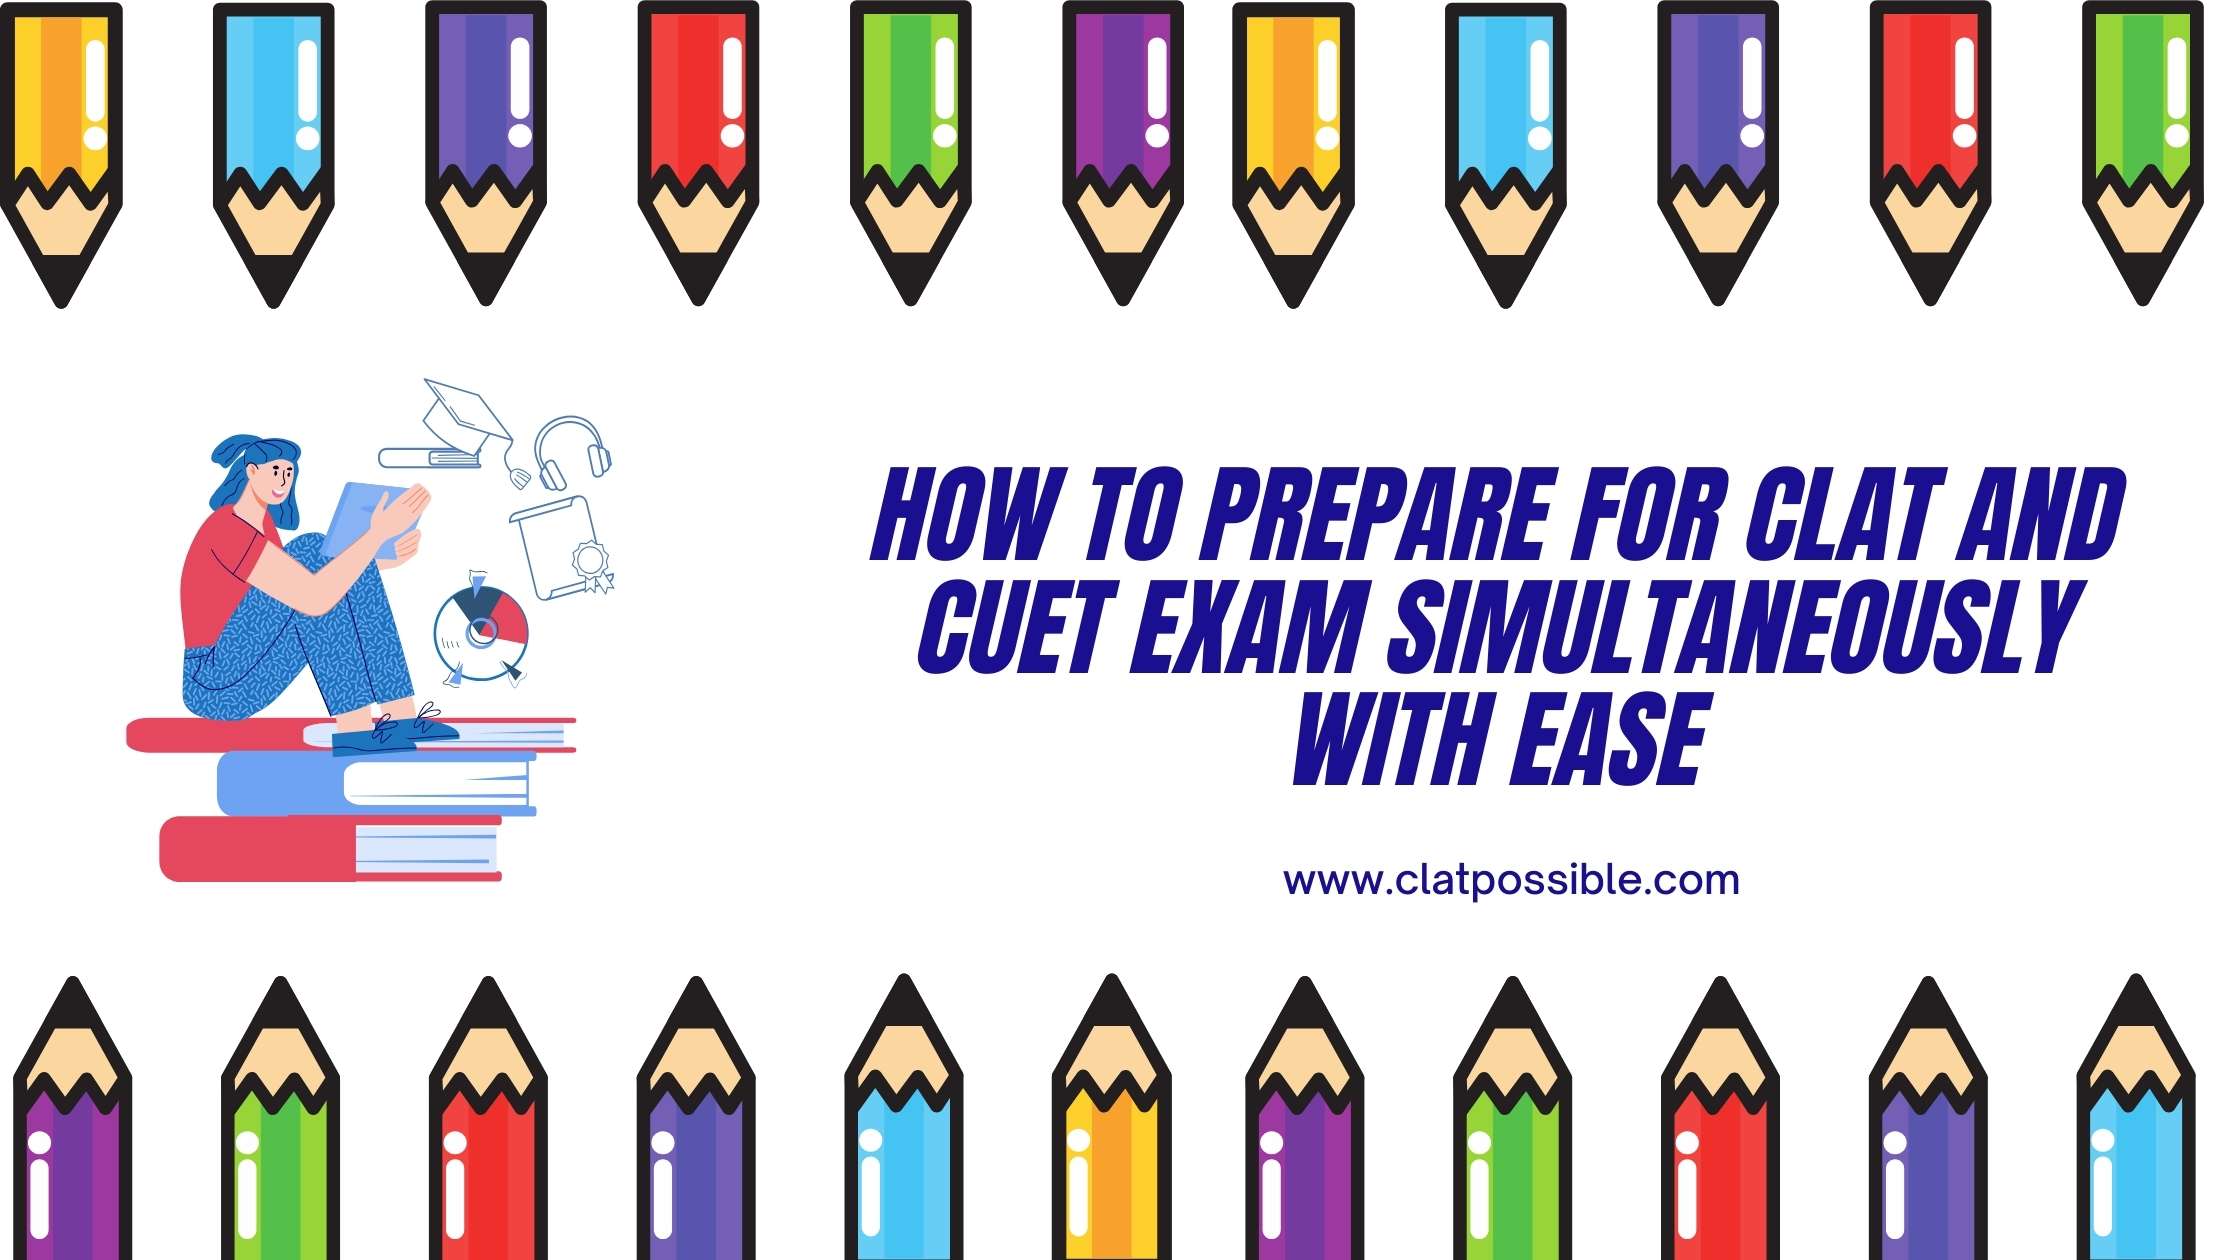 How to Prepare for CLAT and CUET Exam Simultaneously with Ease